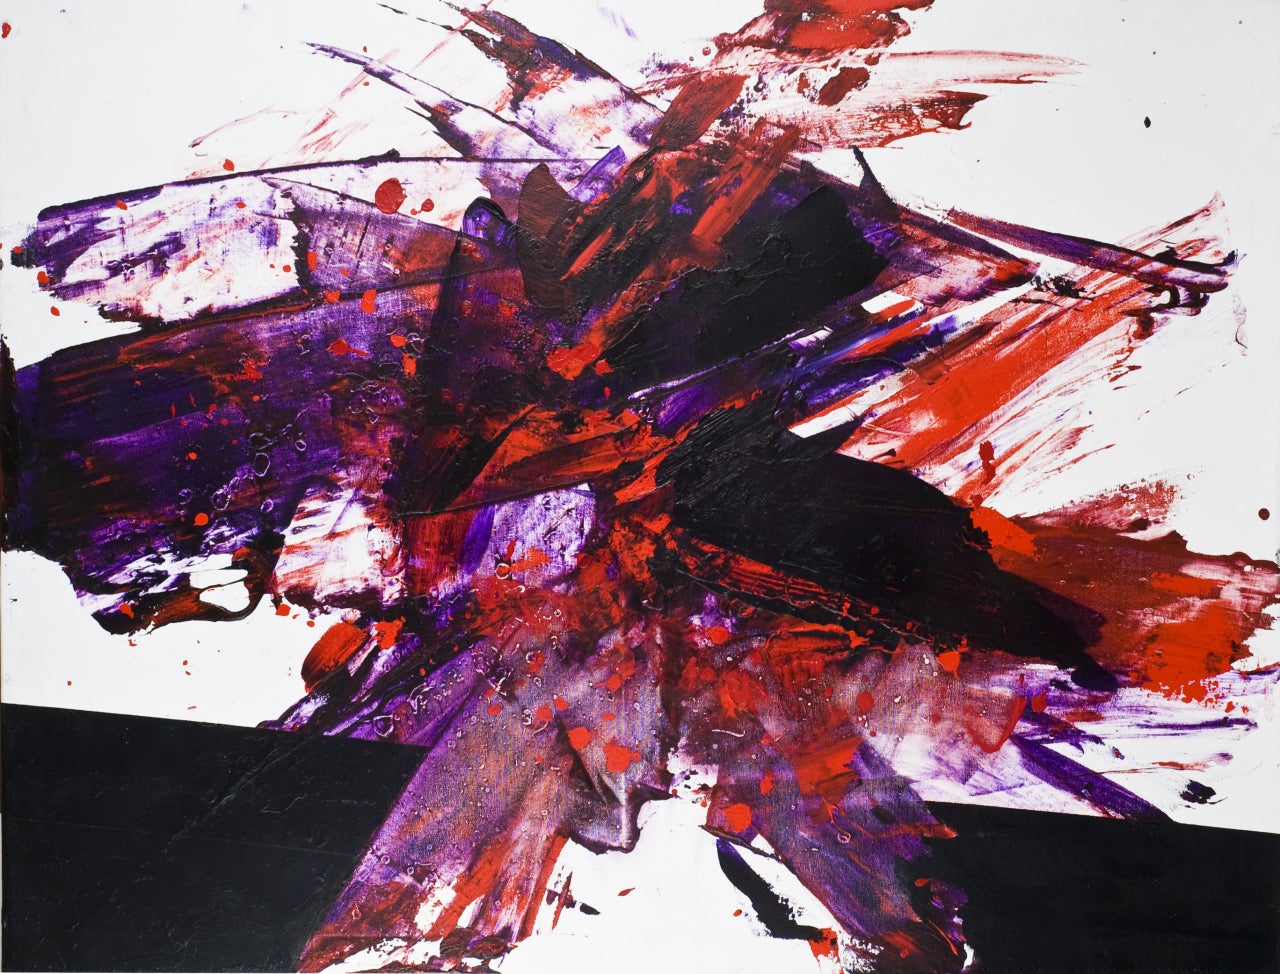 Luis Feito López Abstract Painting - Luis Feito, Abstract Red and Black, Oil on canvas, 2466